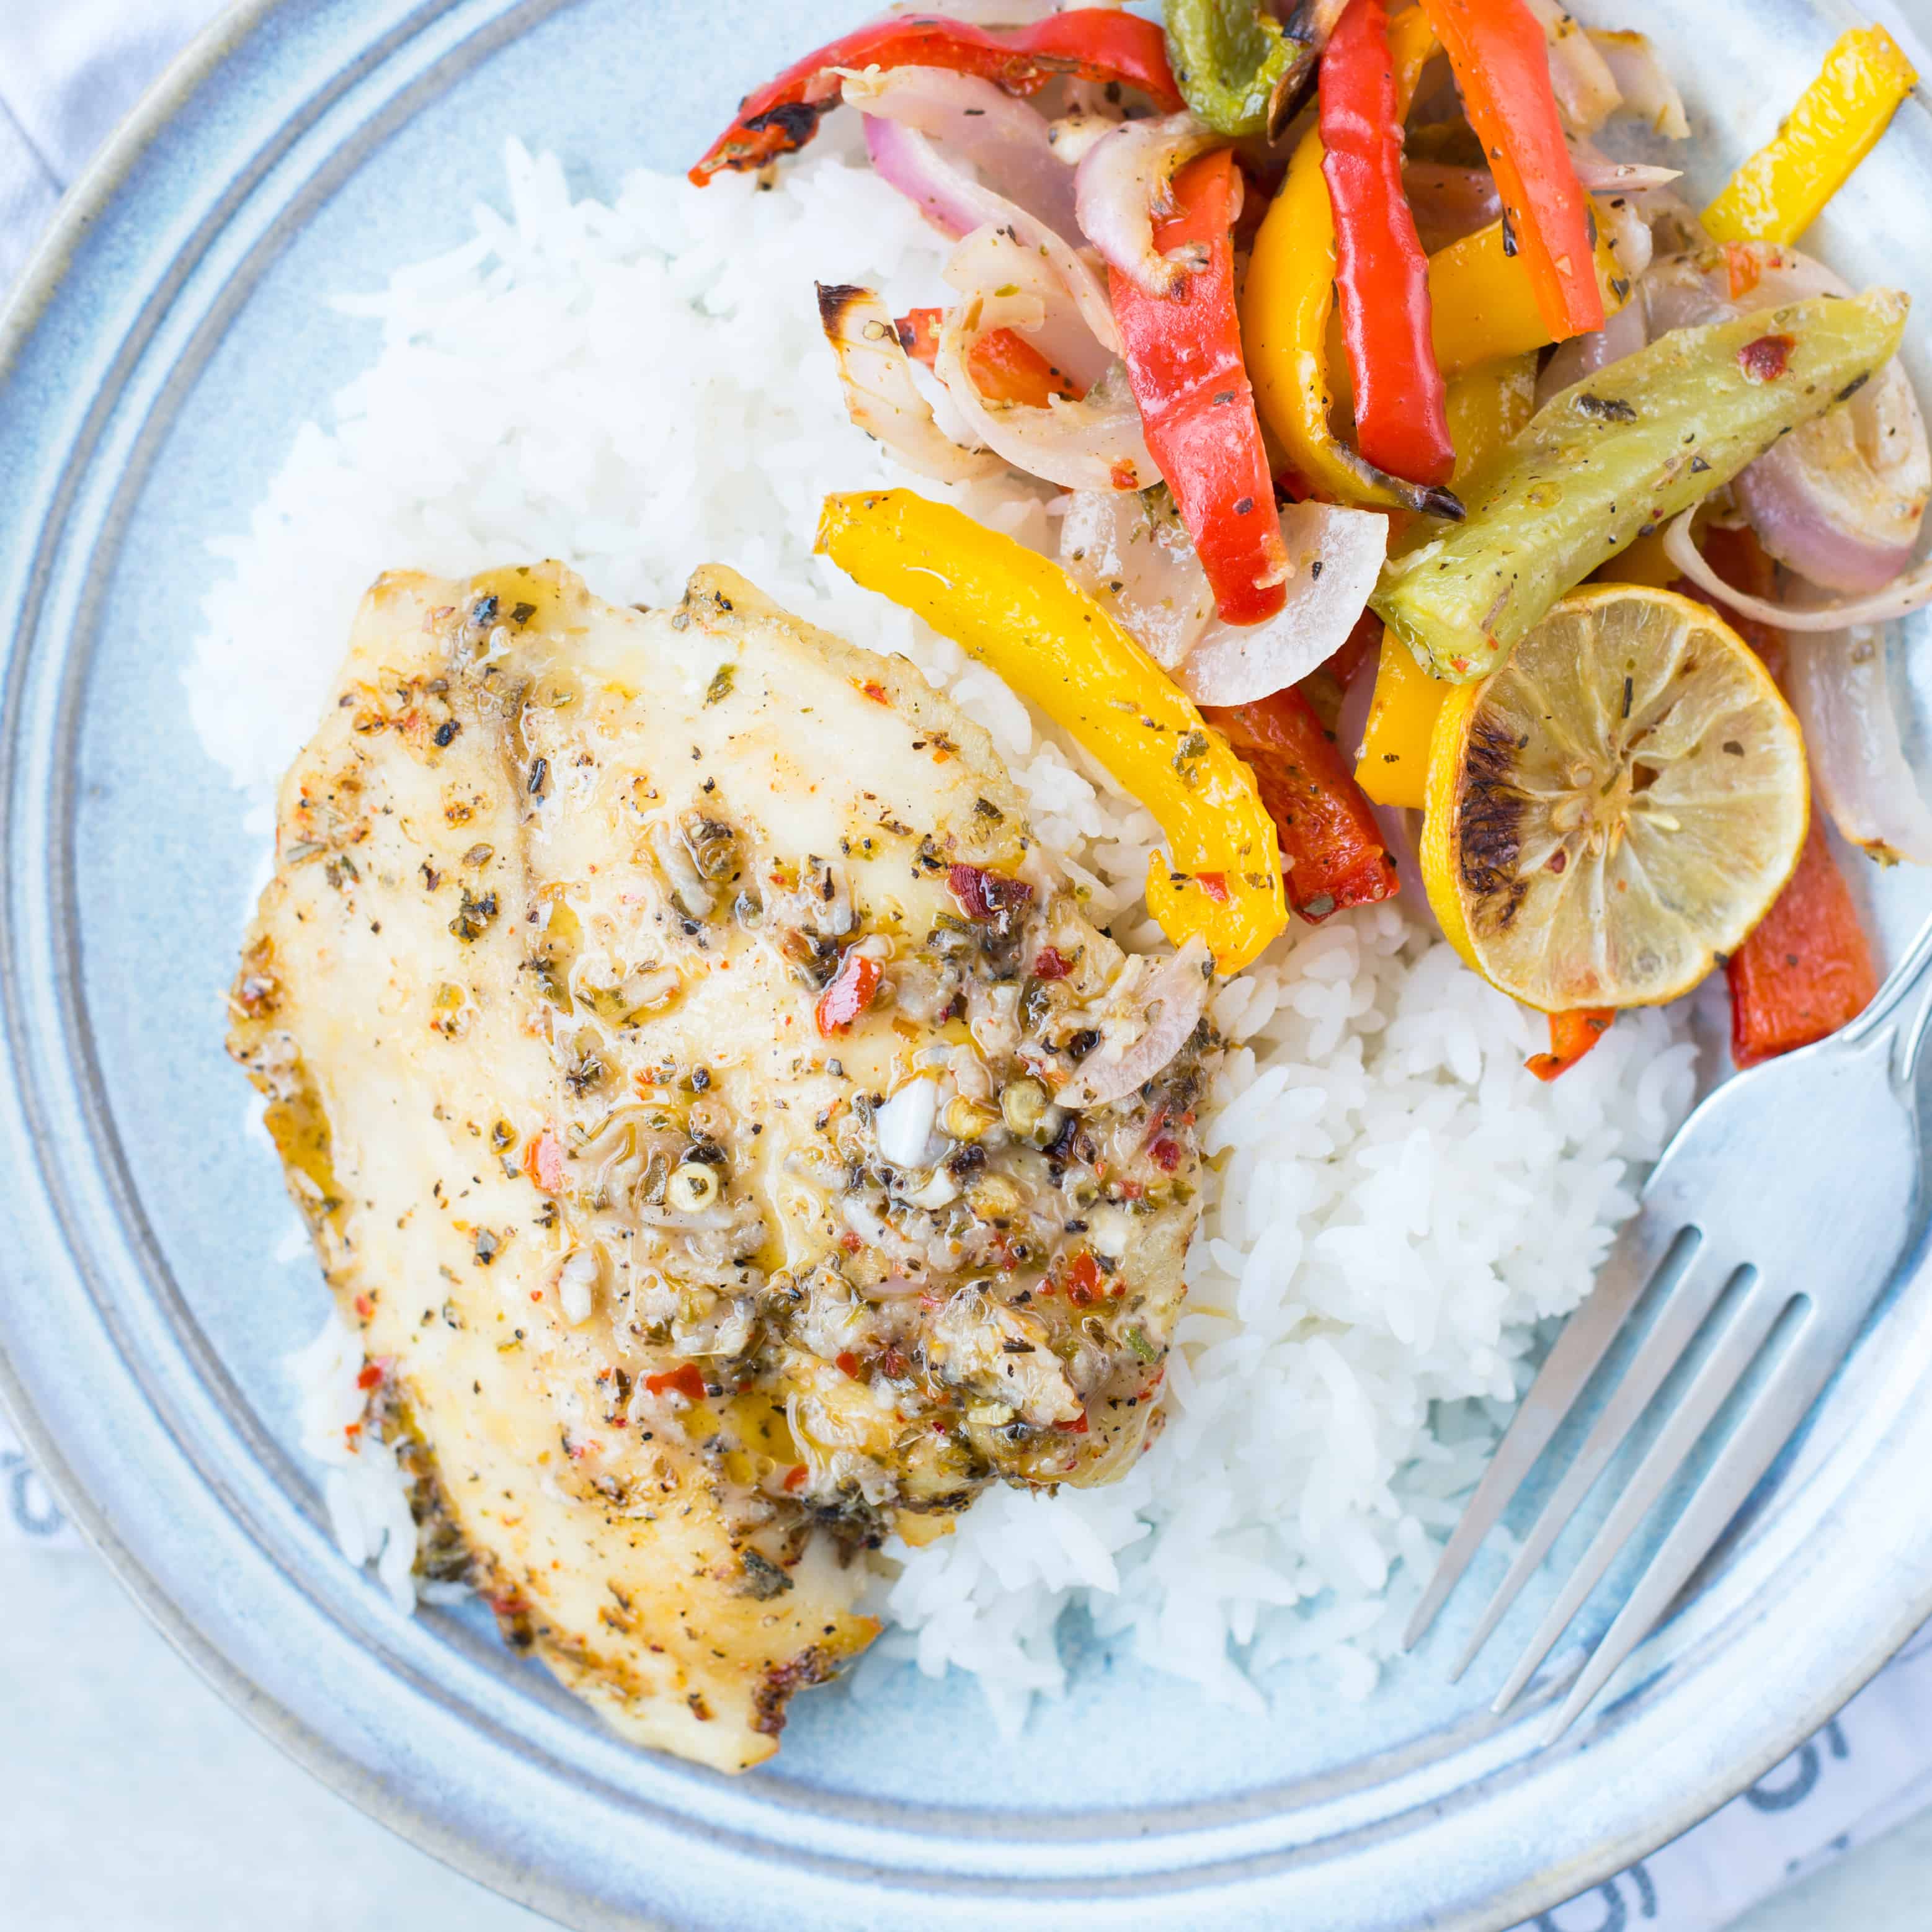 Rice, Tilapia, veggies and a delicious Lemon butter Sauce to drizzle on top. 